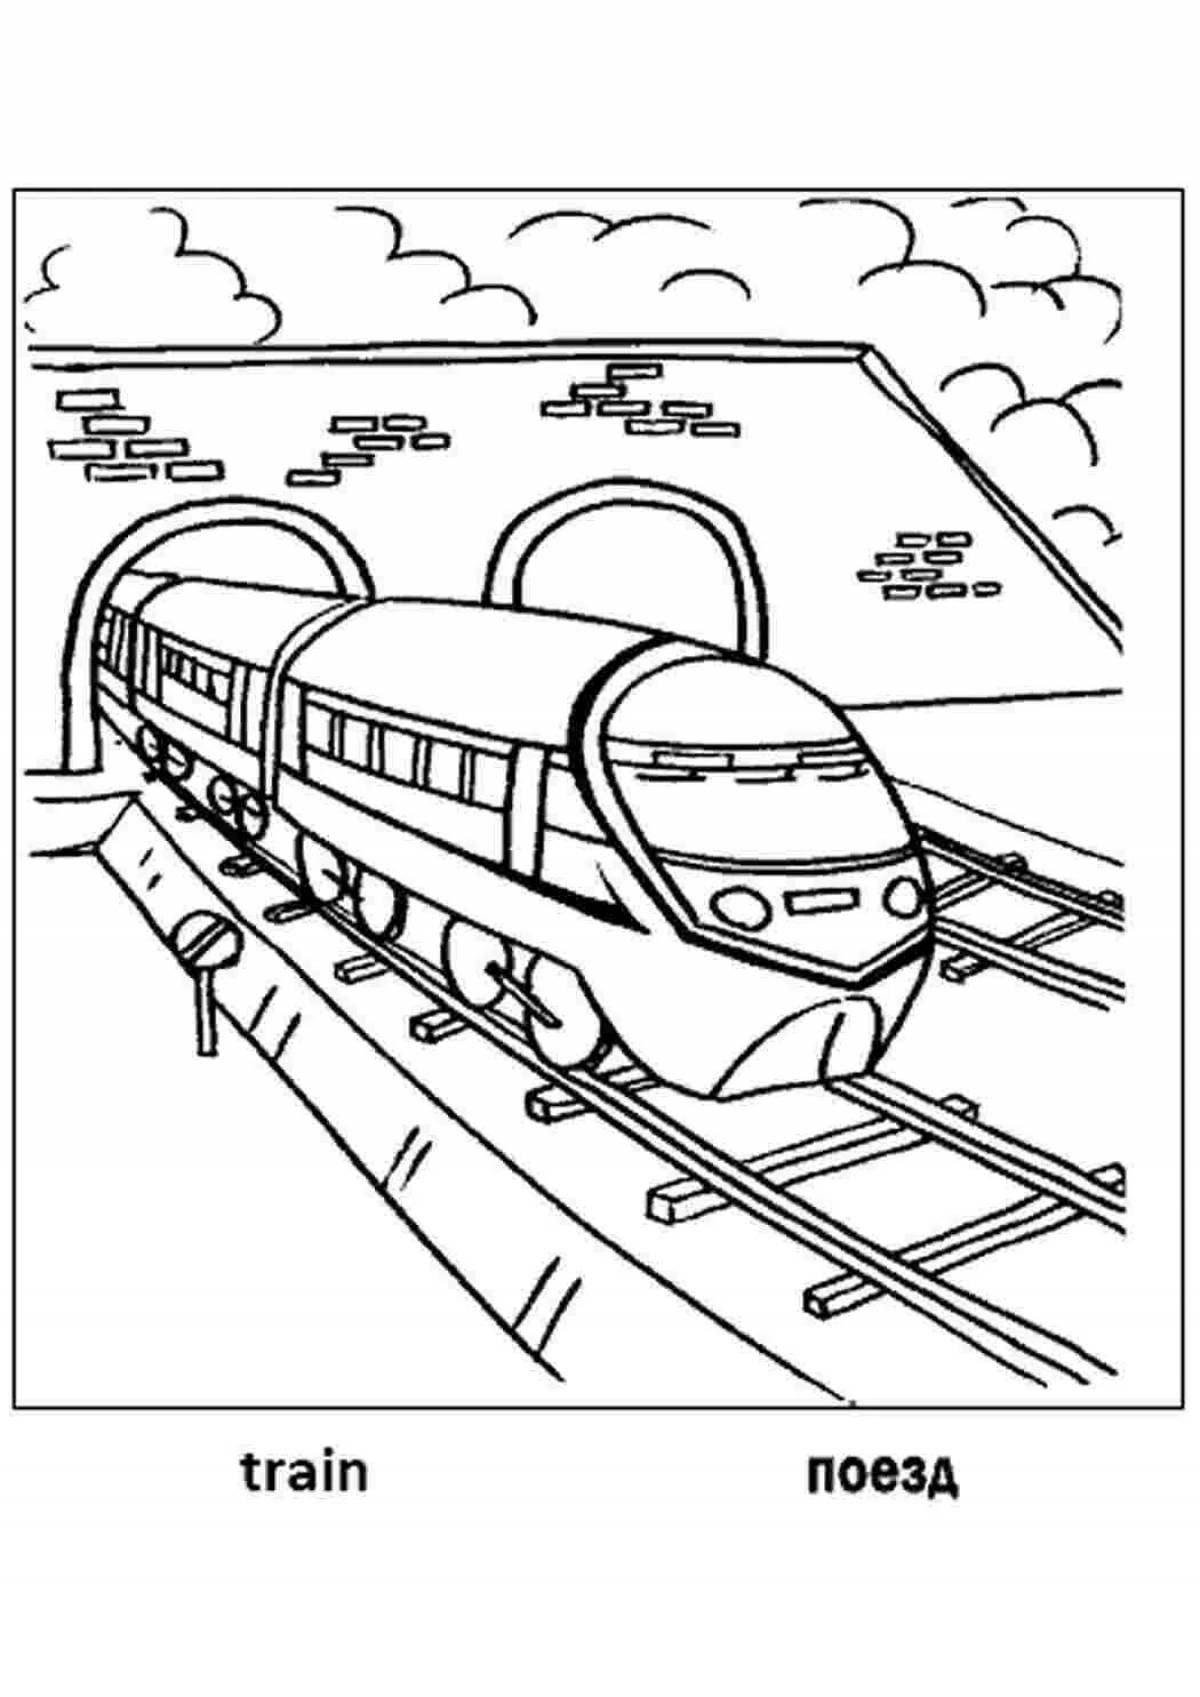 Coloring book stimulating railroad safety